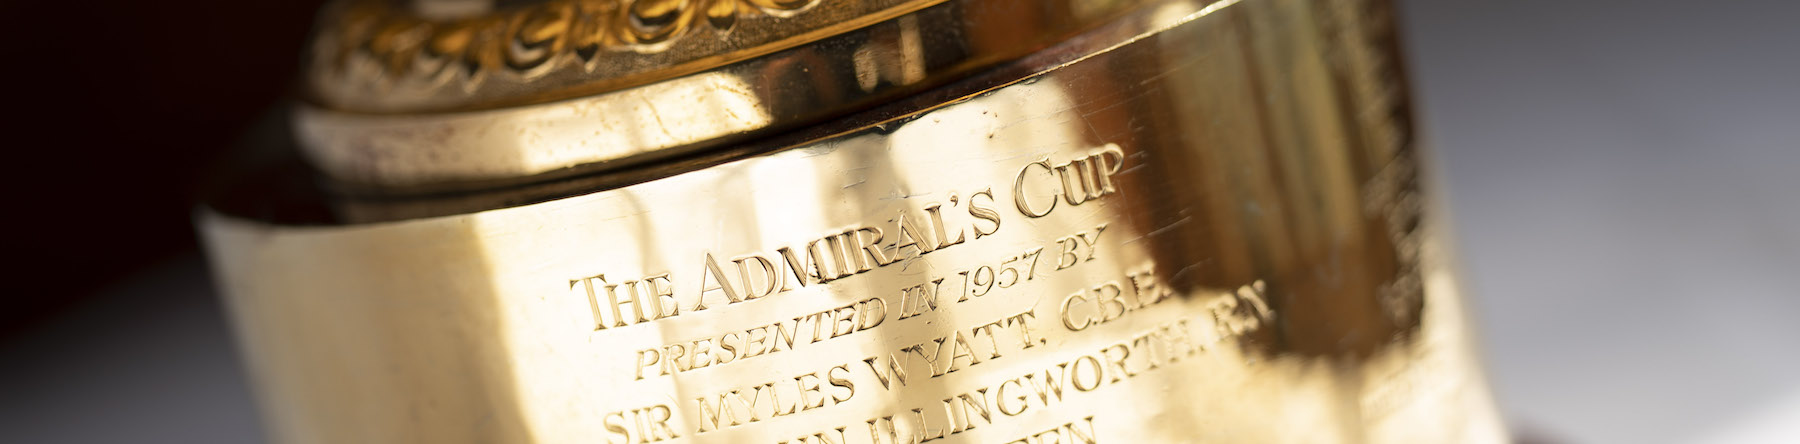 The Admiral's Cup Returns